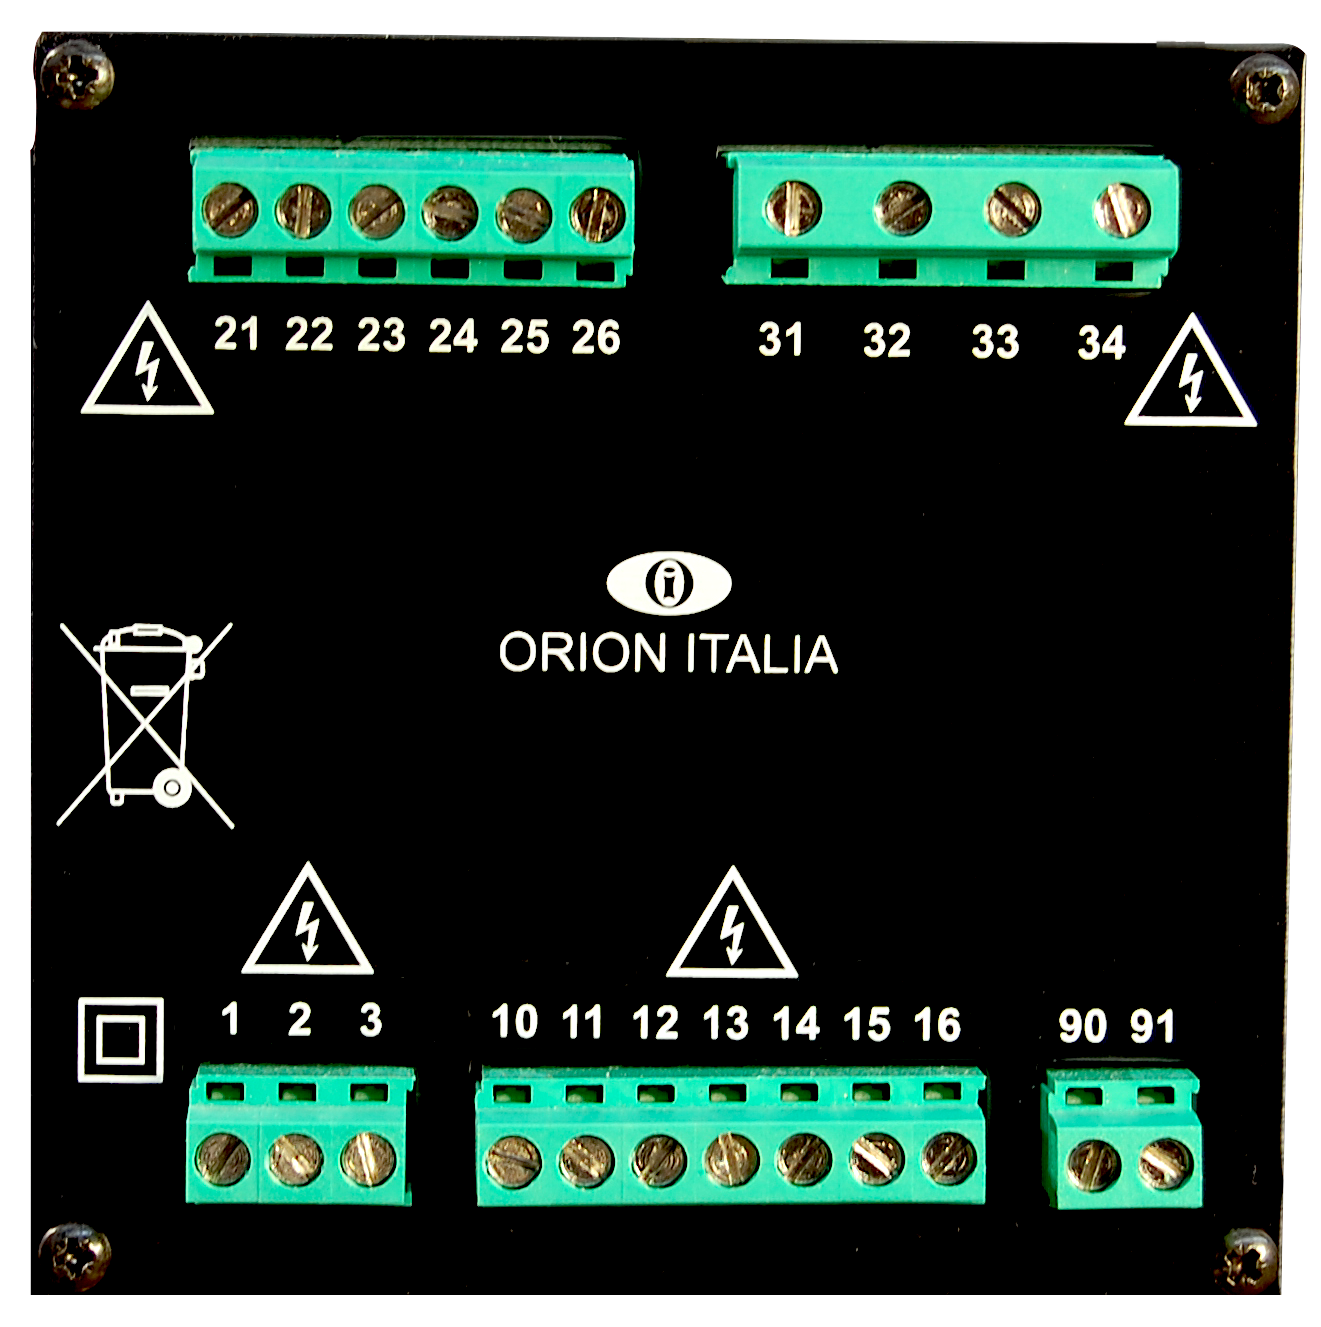 Energy Meter Back- Protection Relay - Orion Italia